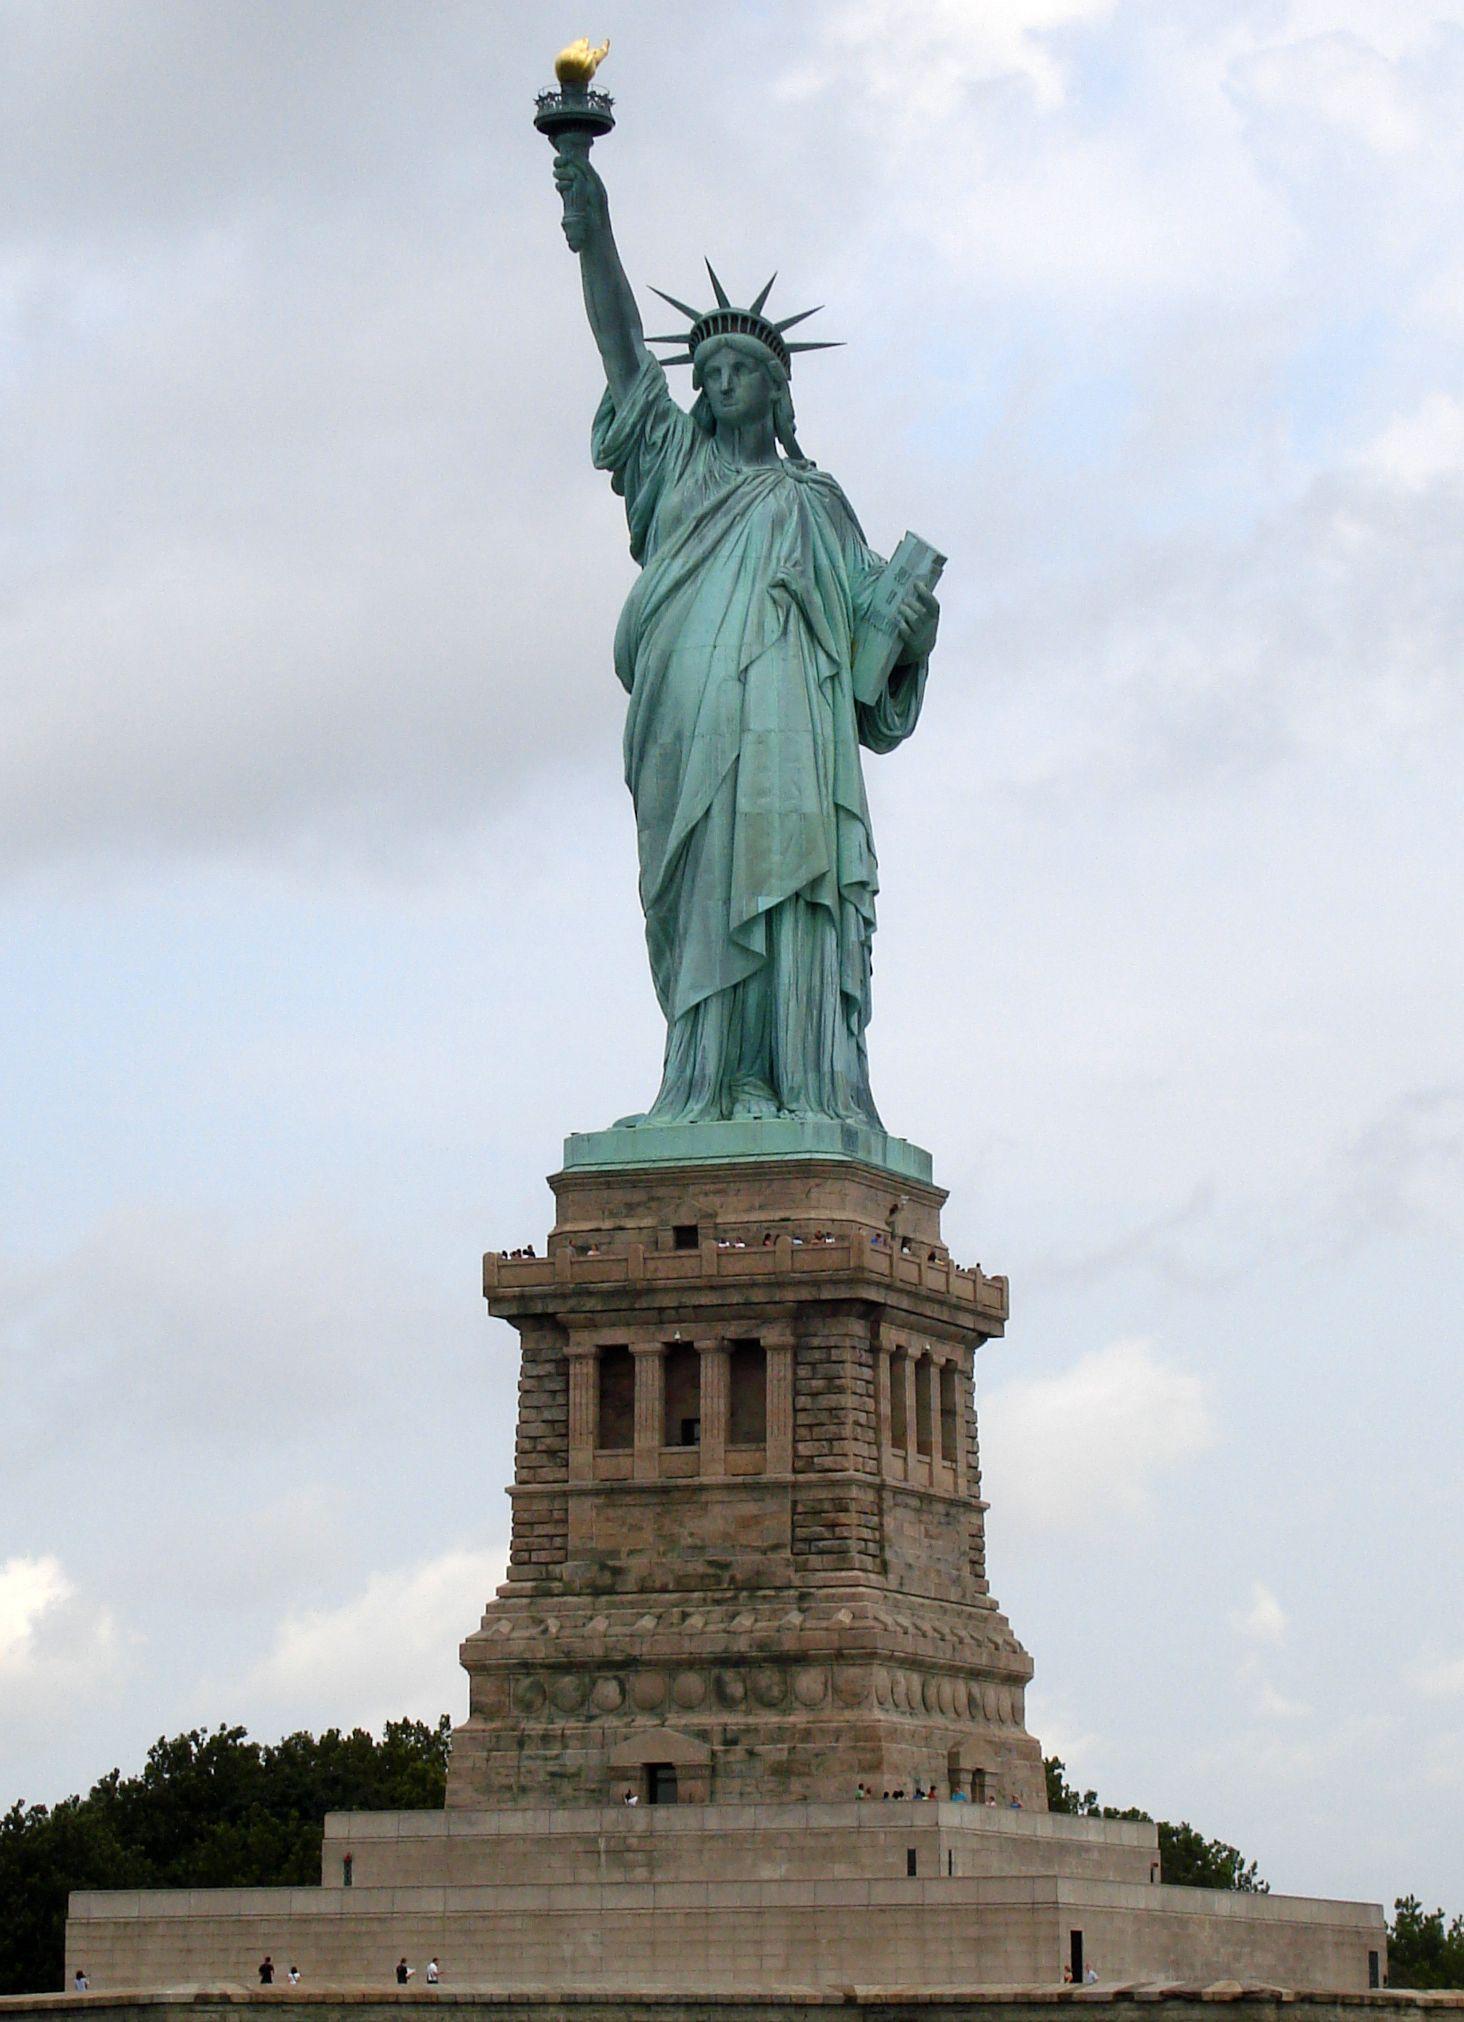 The Statue of Liberty Liberty Enlightening the World; French: La